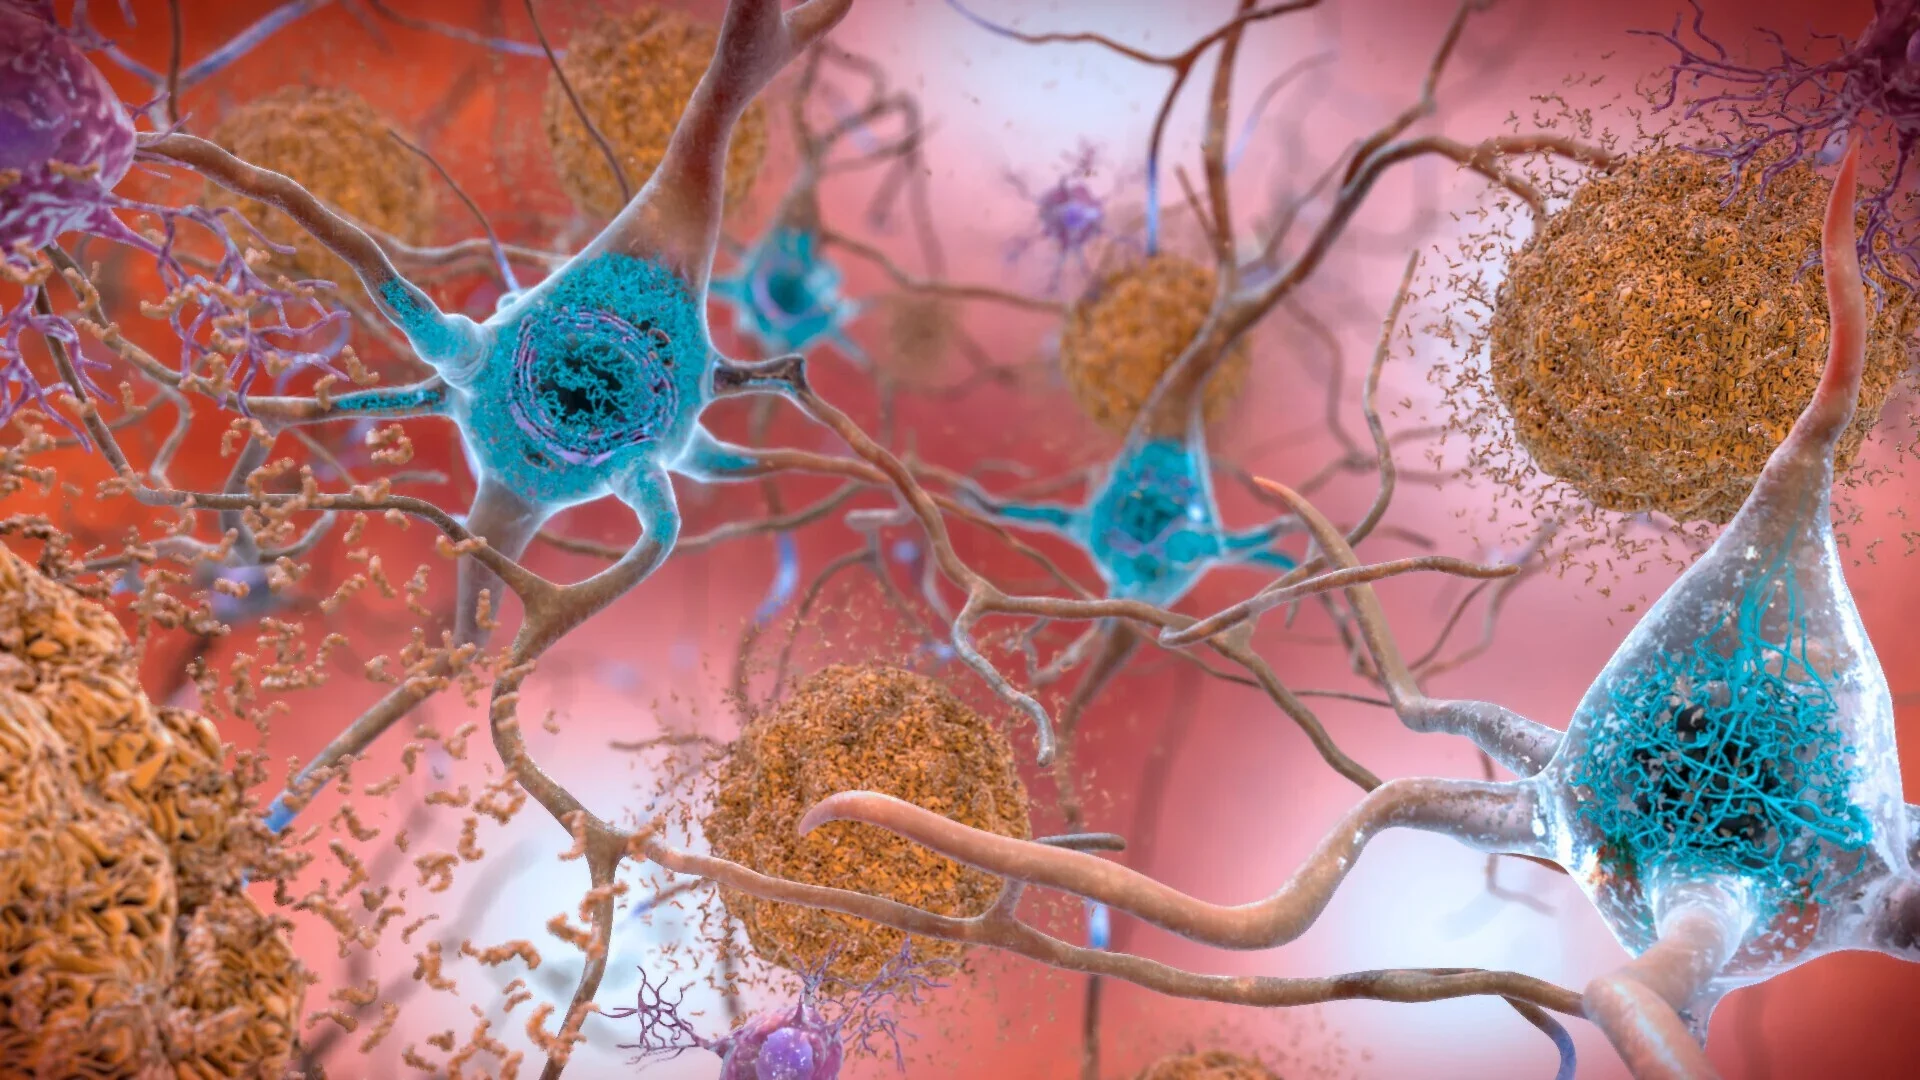 Scientists have found a way to restore nerve cells using magnets